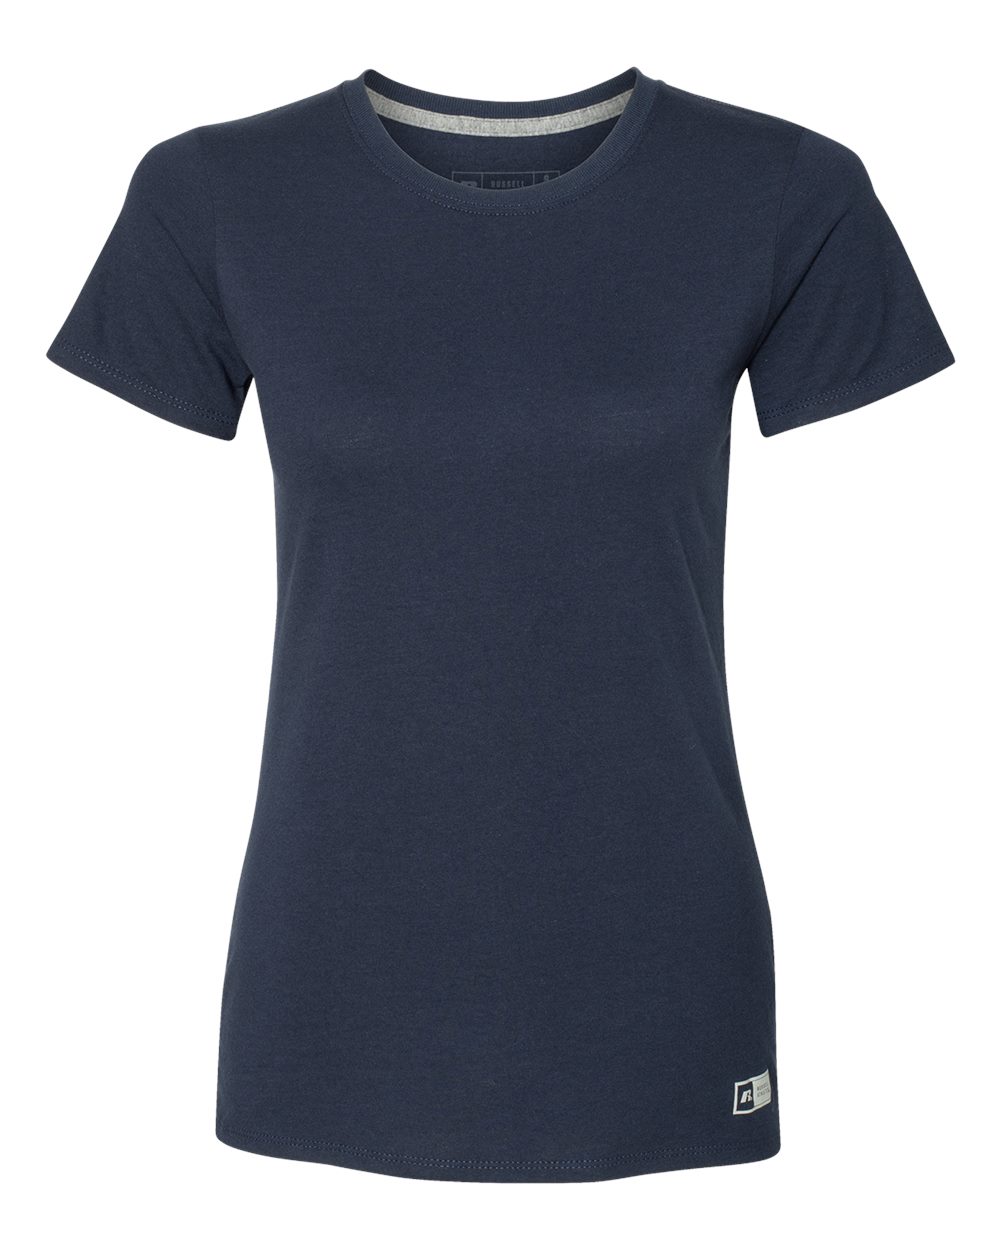 Russell Athletic 64STTX - Women's Essential 60/40 Performance Tee